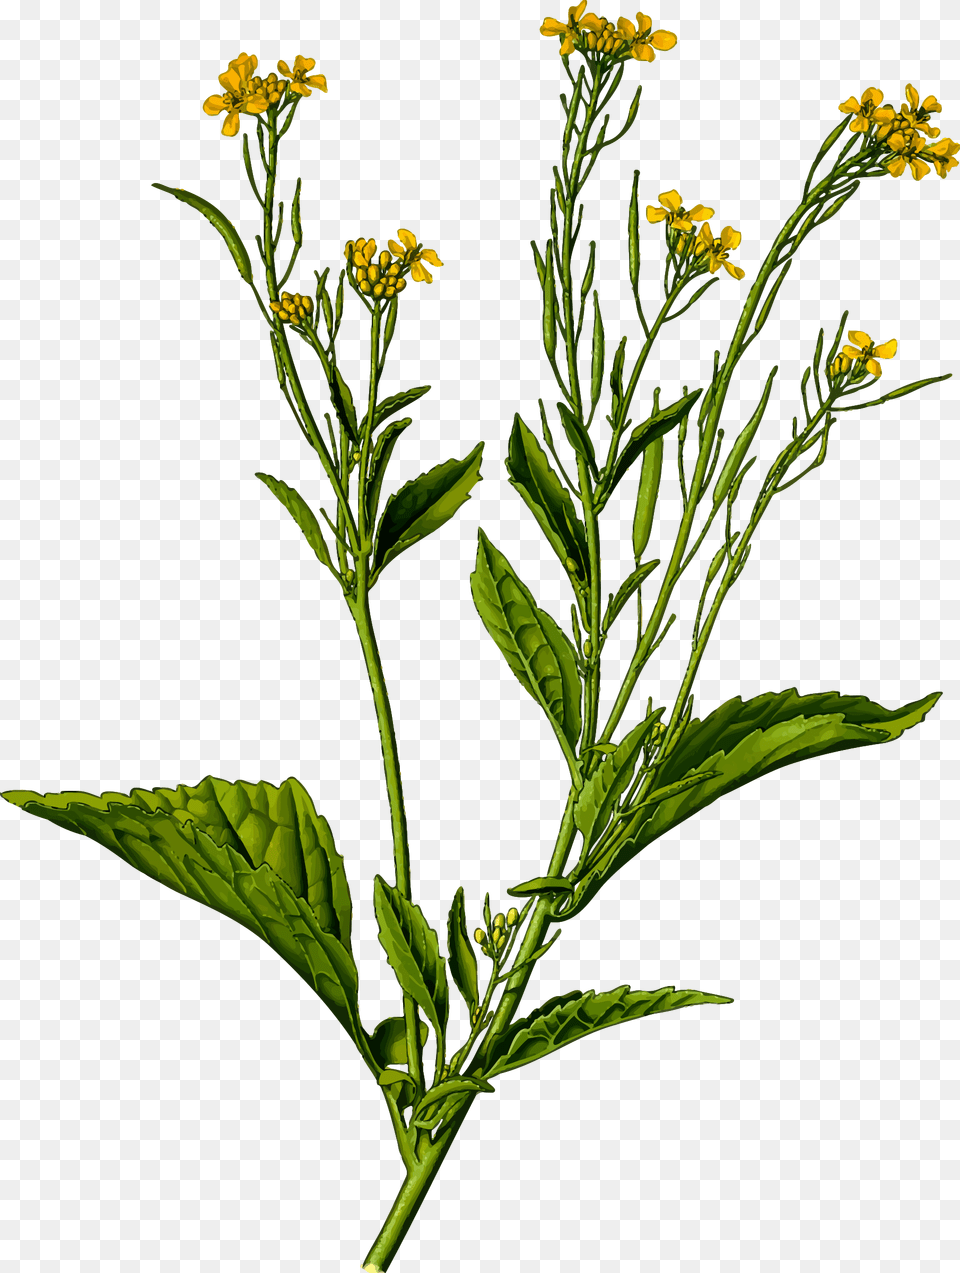 This Icons Design Of Mustard Greens, Flower, Plant, Apiaceae, Acanthaceae Png Image